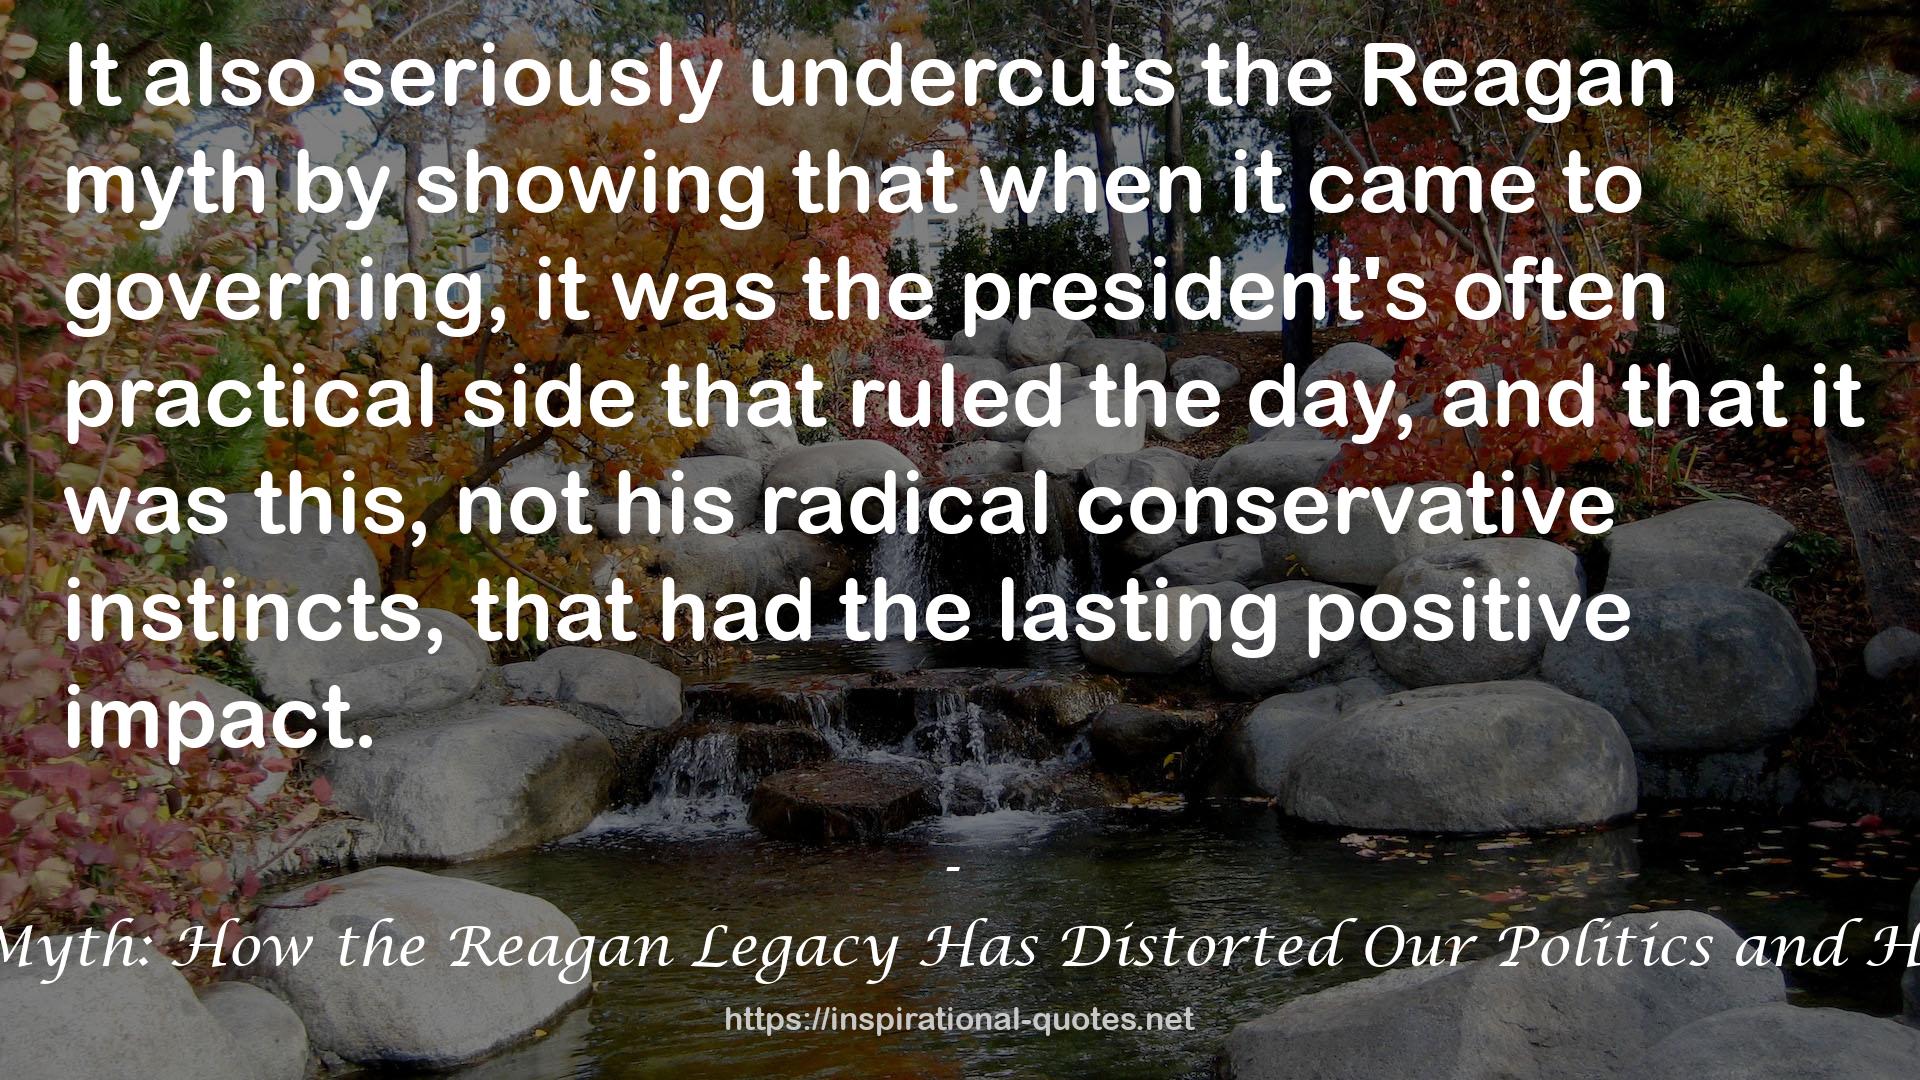 Tear Down This Myth: How the Reagan Legacy Has Distorted Our Politics and Haunts Our Future QUOTES